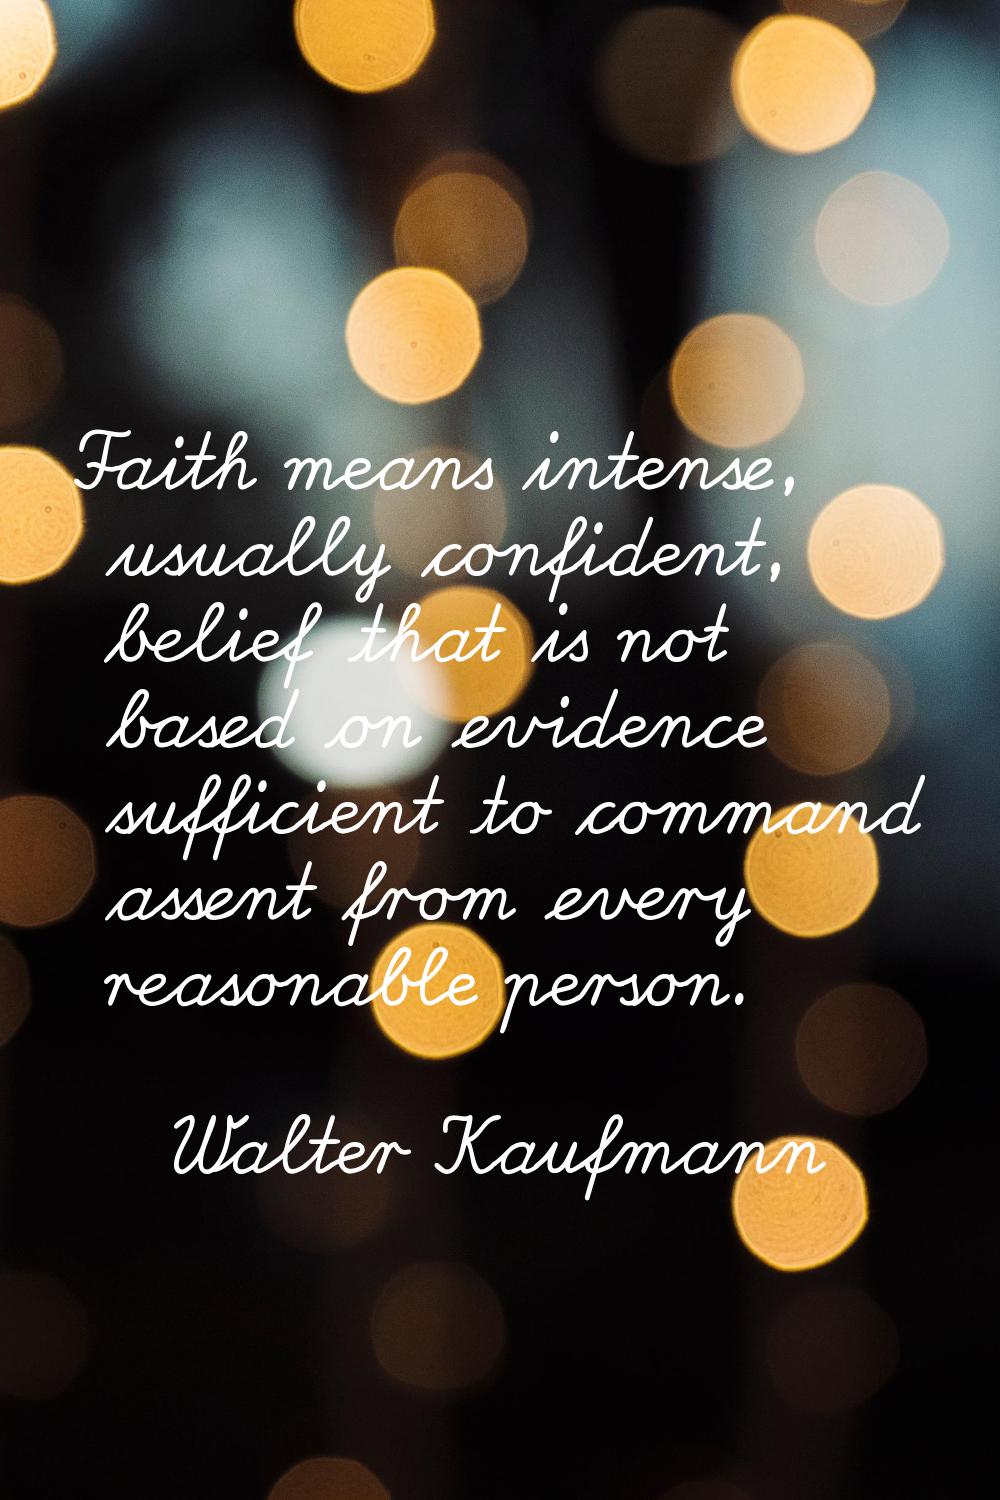 Faith means intense, usually confident, belief that is not based on evidence sufficient to command 